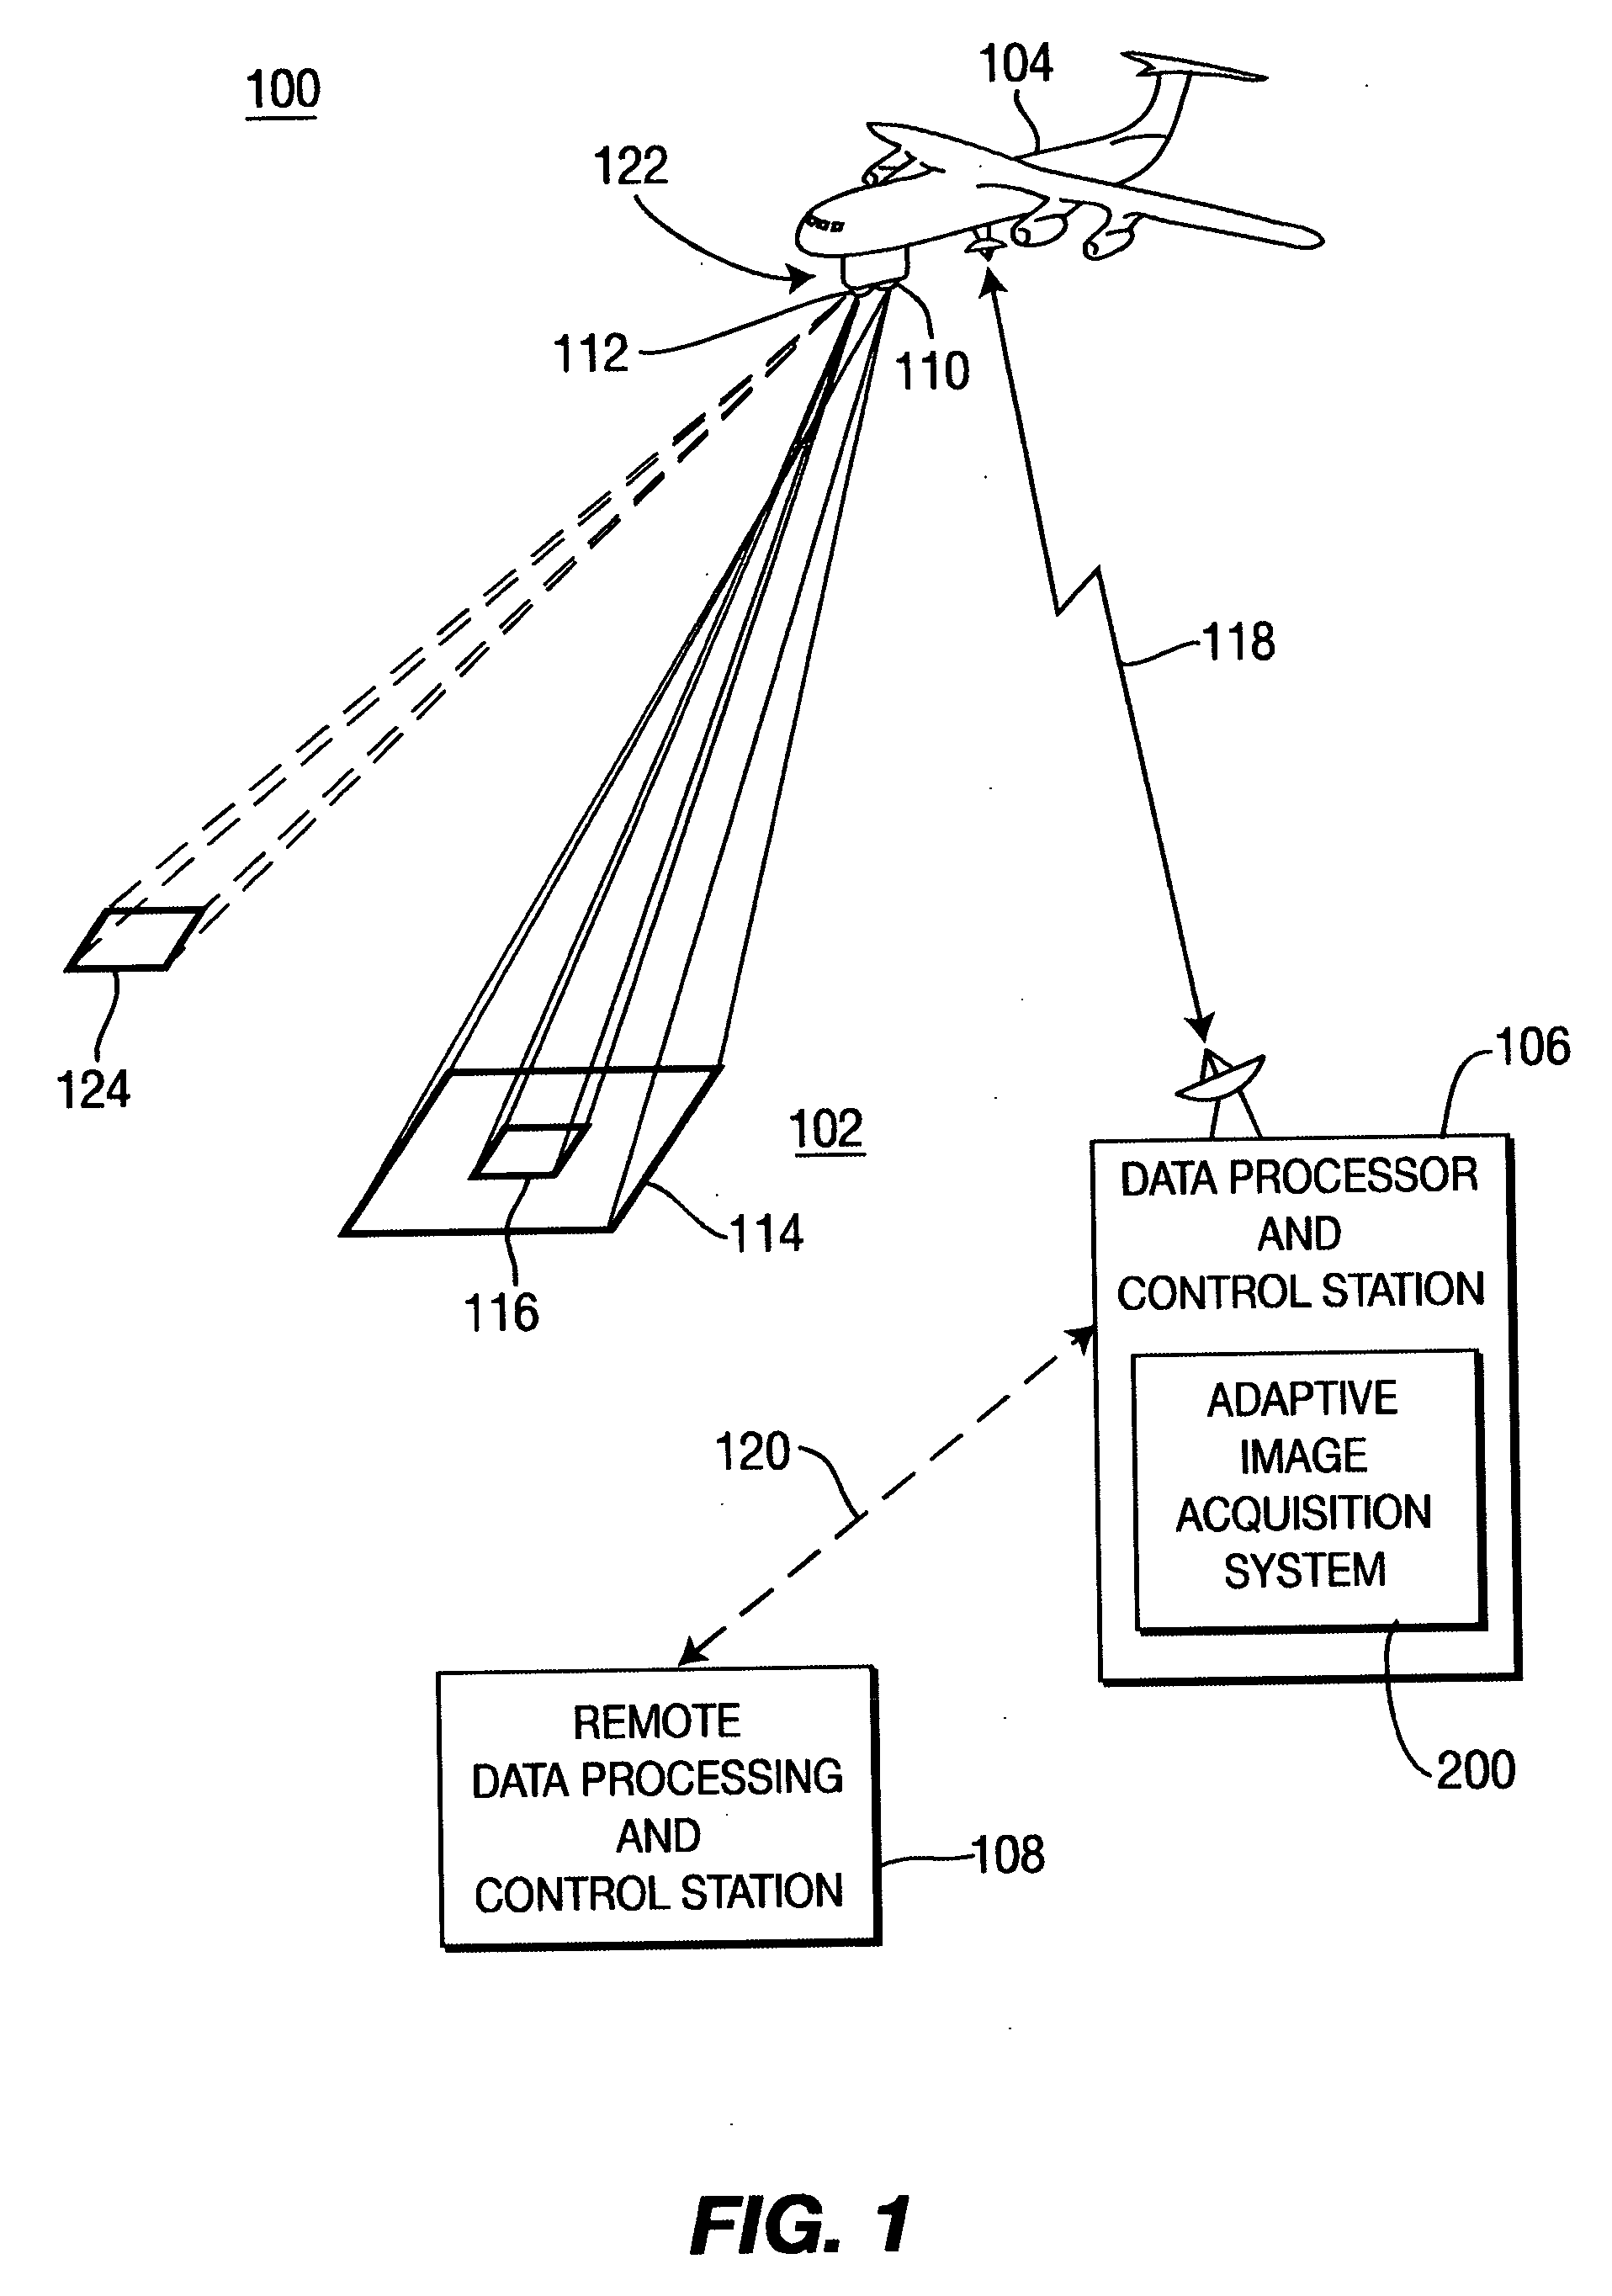 Method and system for performing adaptive image acquisition